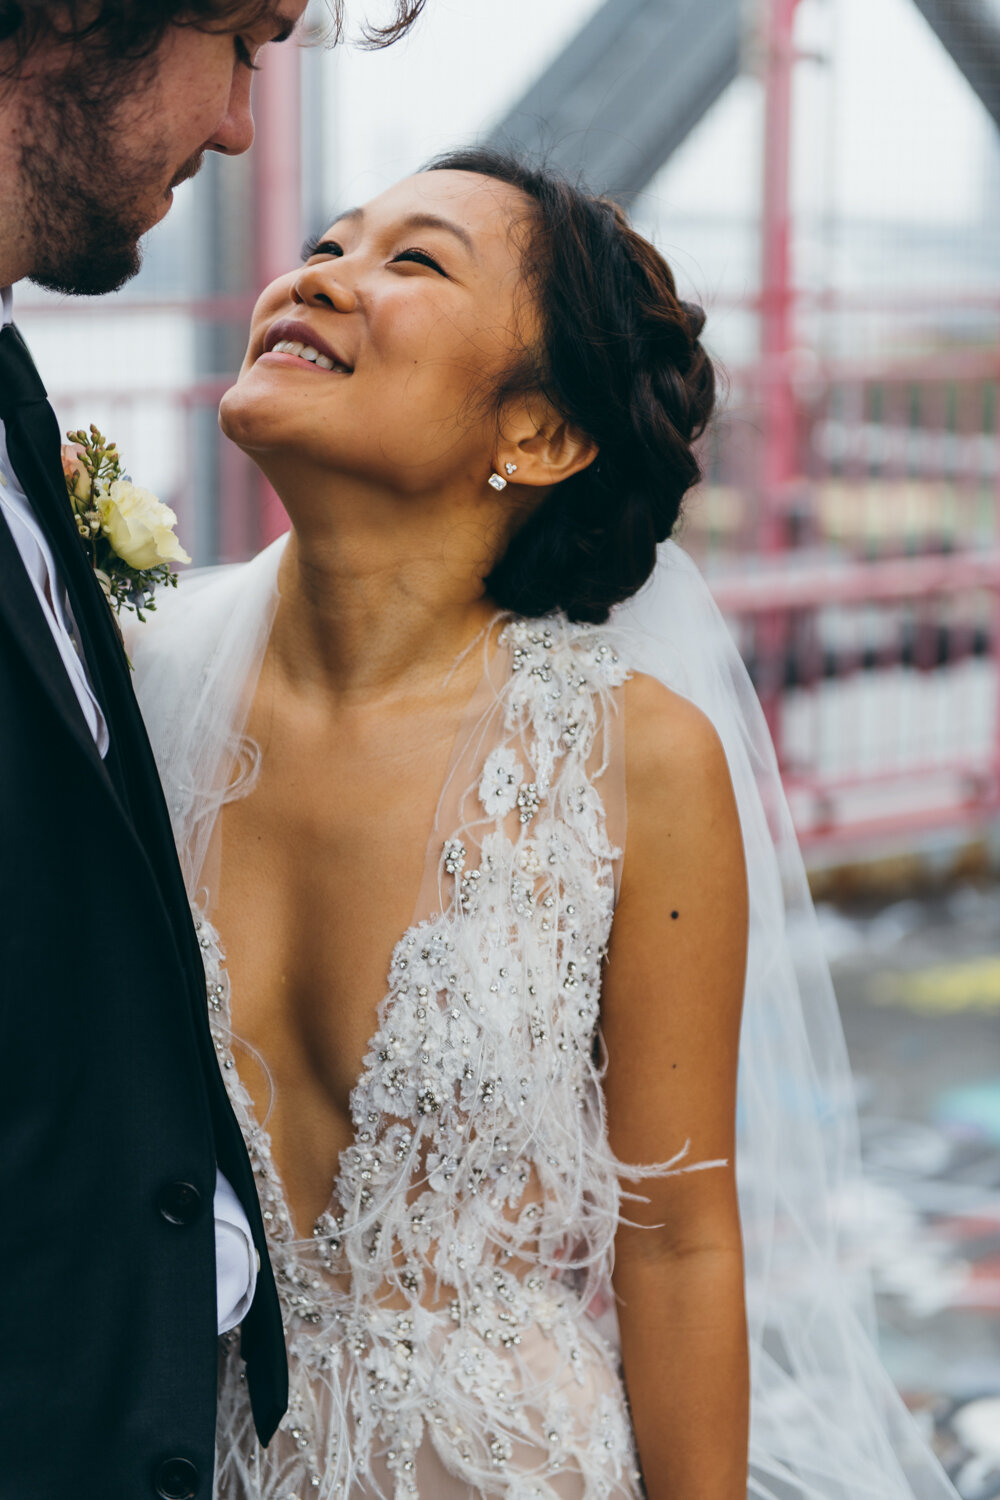 Bride looks up at the groom with a big smile on her face as he smiles down at her. The feathers on her white dress are blowing in the wind.

Central Park Wedding Photography. Williamsburg Bridge Bridal Portraits. Luxury NYC Wedding Photographer. Manhattan Micro Wedding.